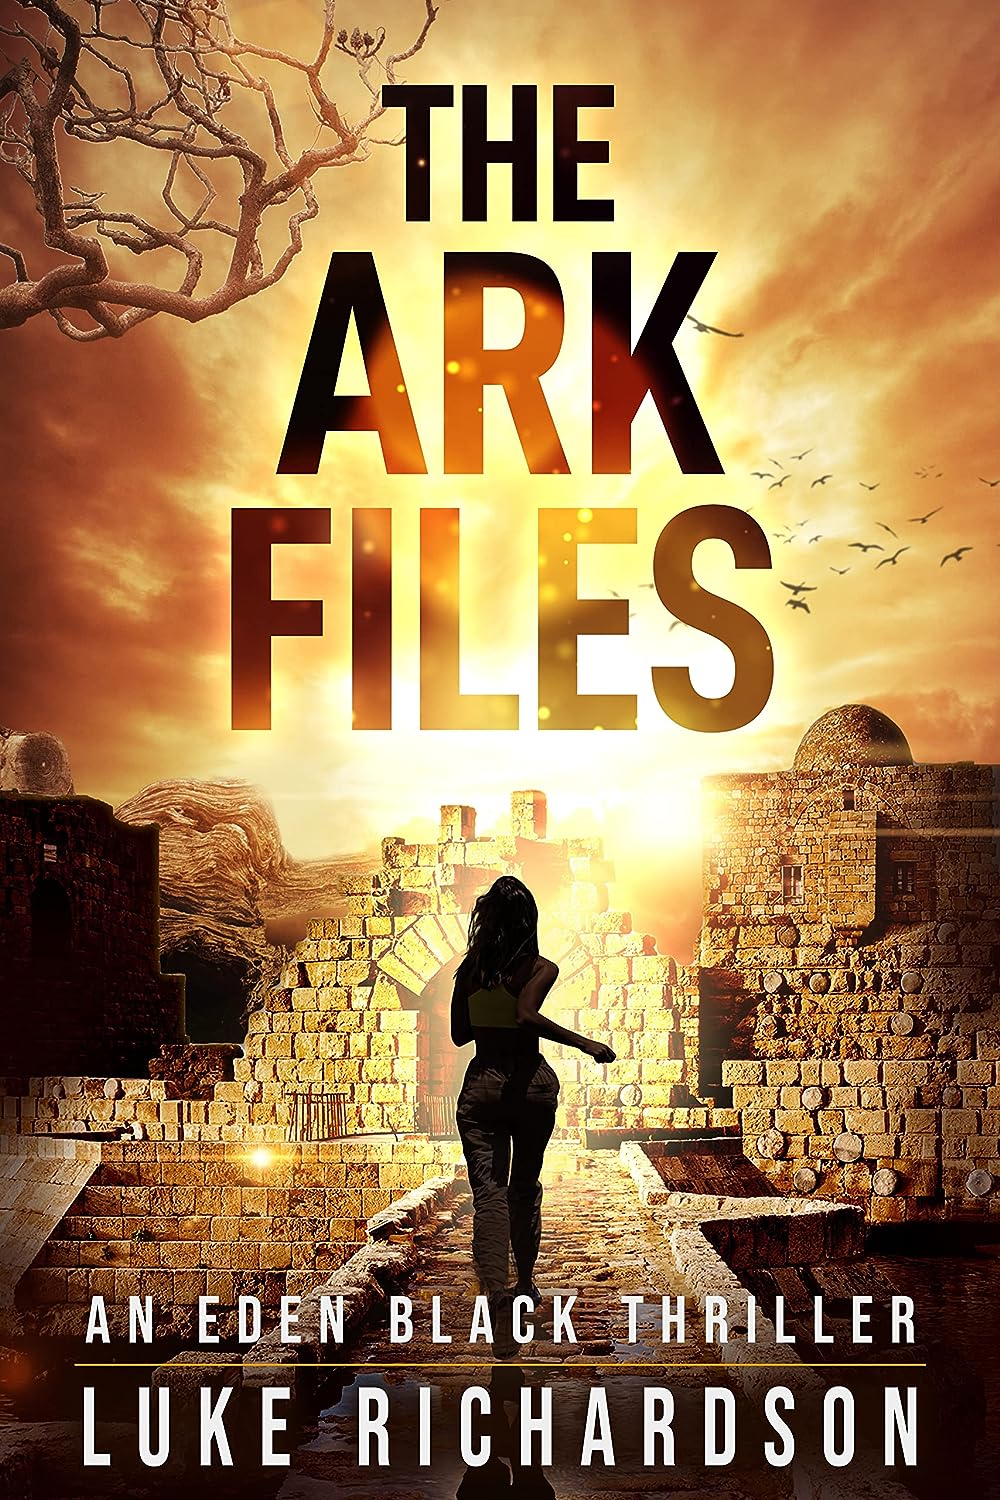 Synopsis of "The Ark Files